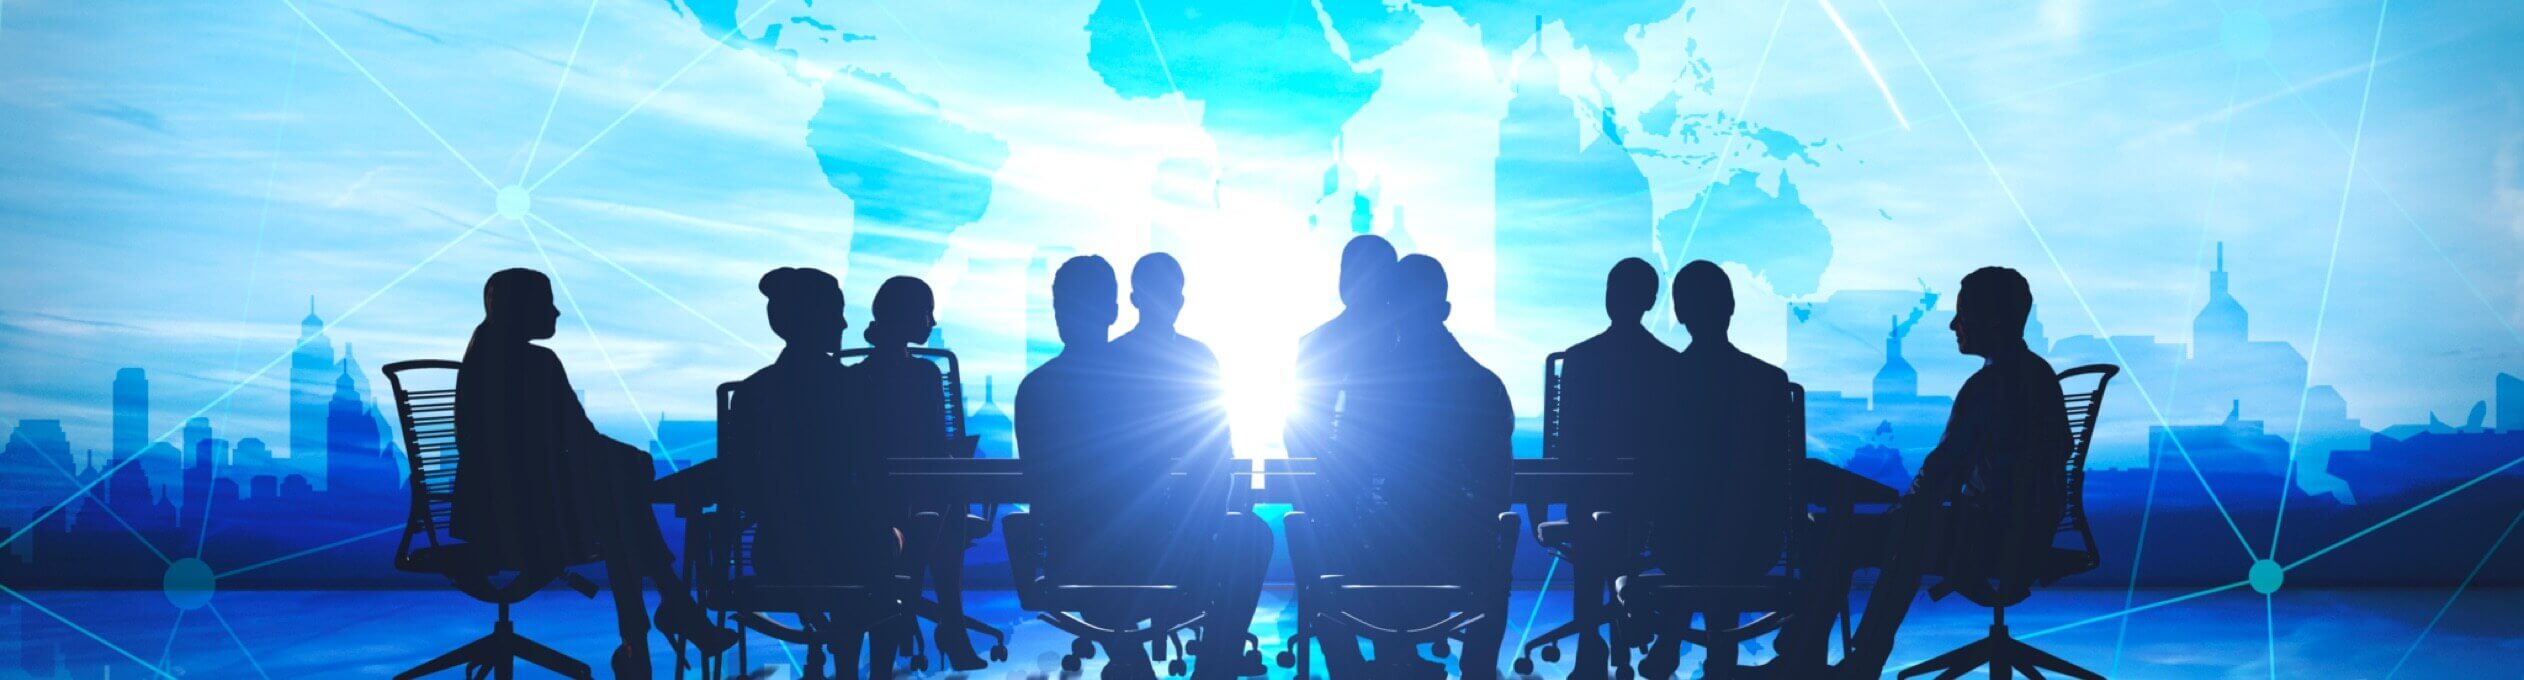 Silhouette of a group of businesspeople seated at a table against a modern blue globe background.